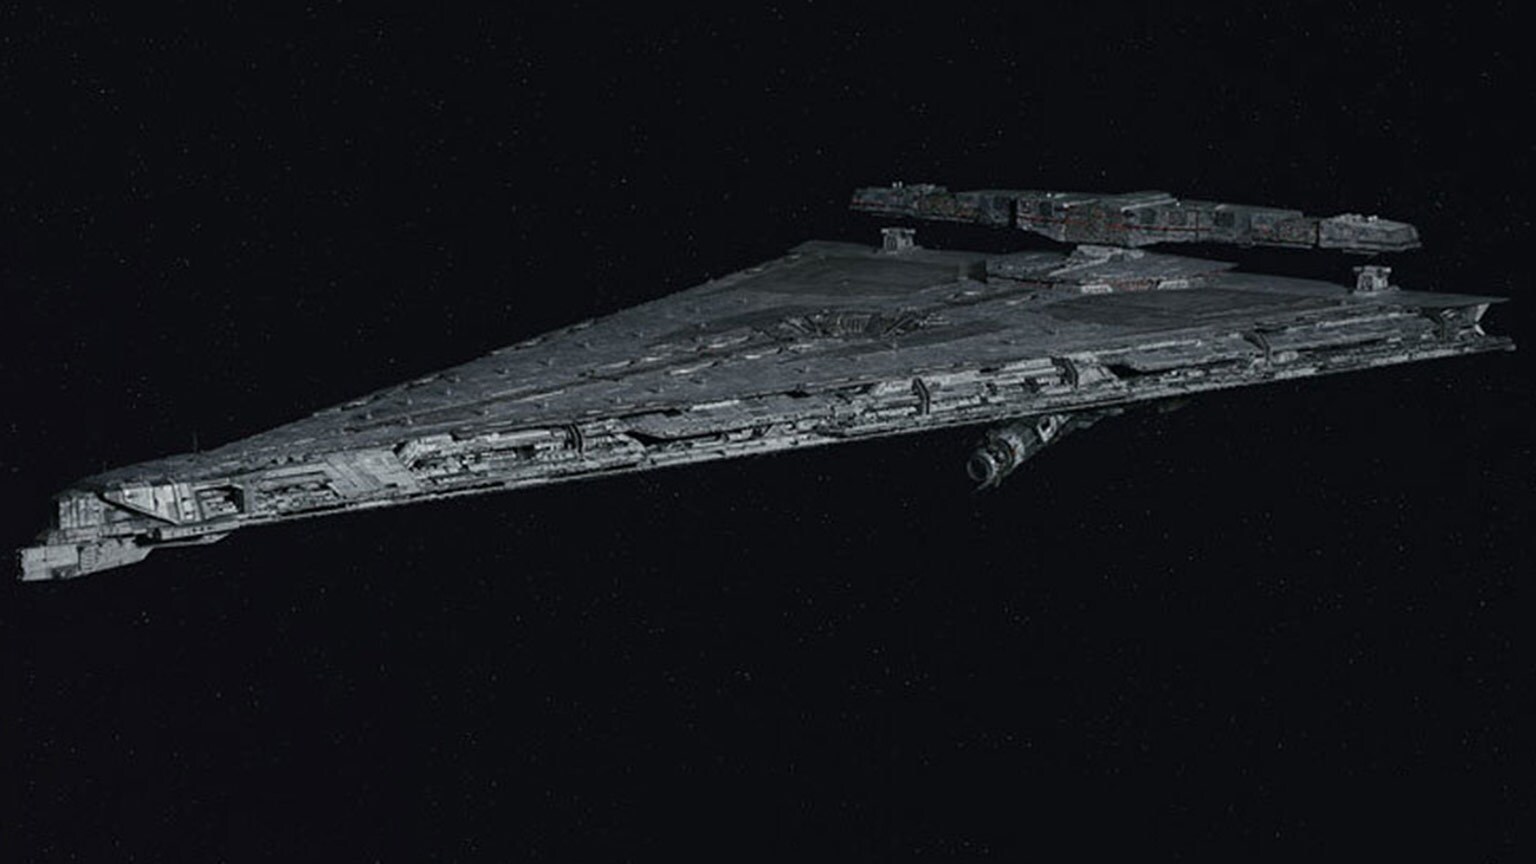 Poll: What is Your Favorite New Ship from Star Wars: The Last Jedi?